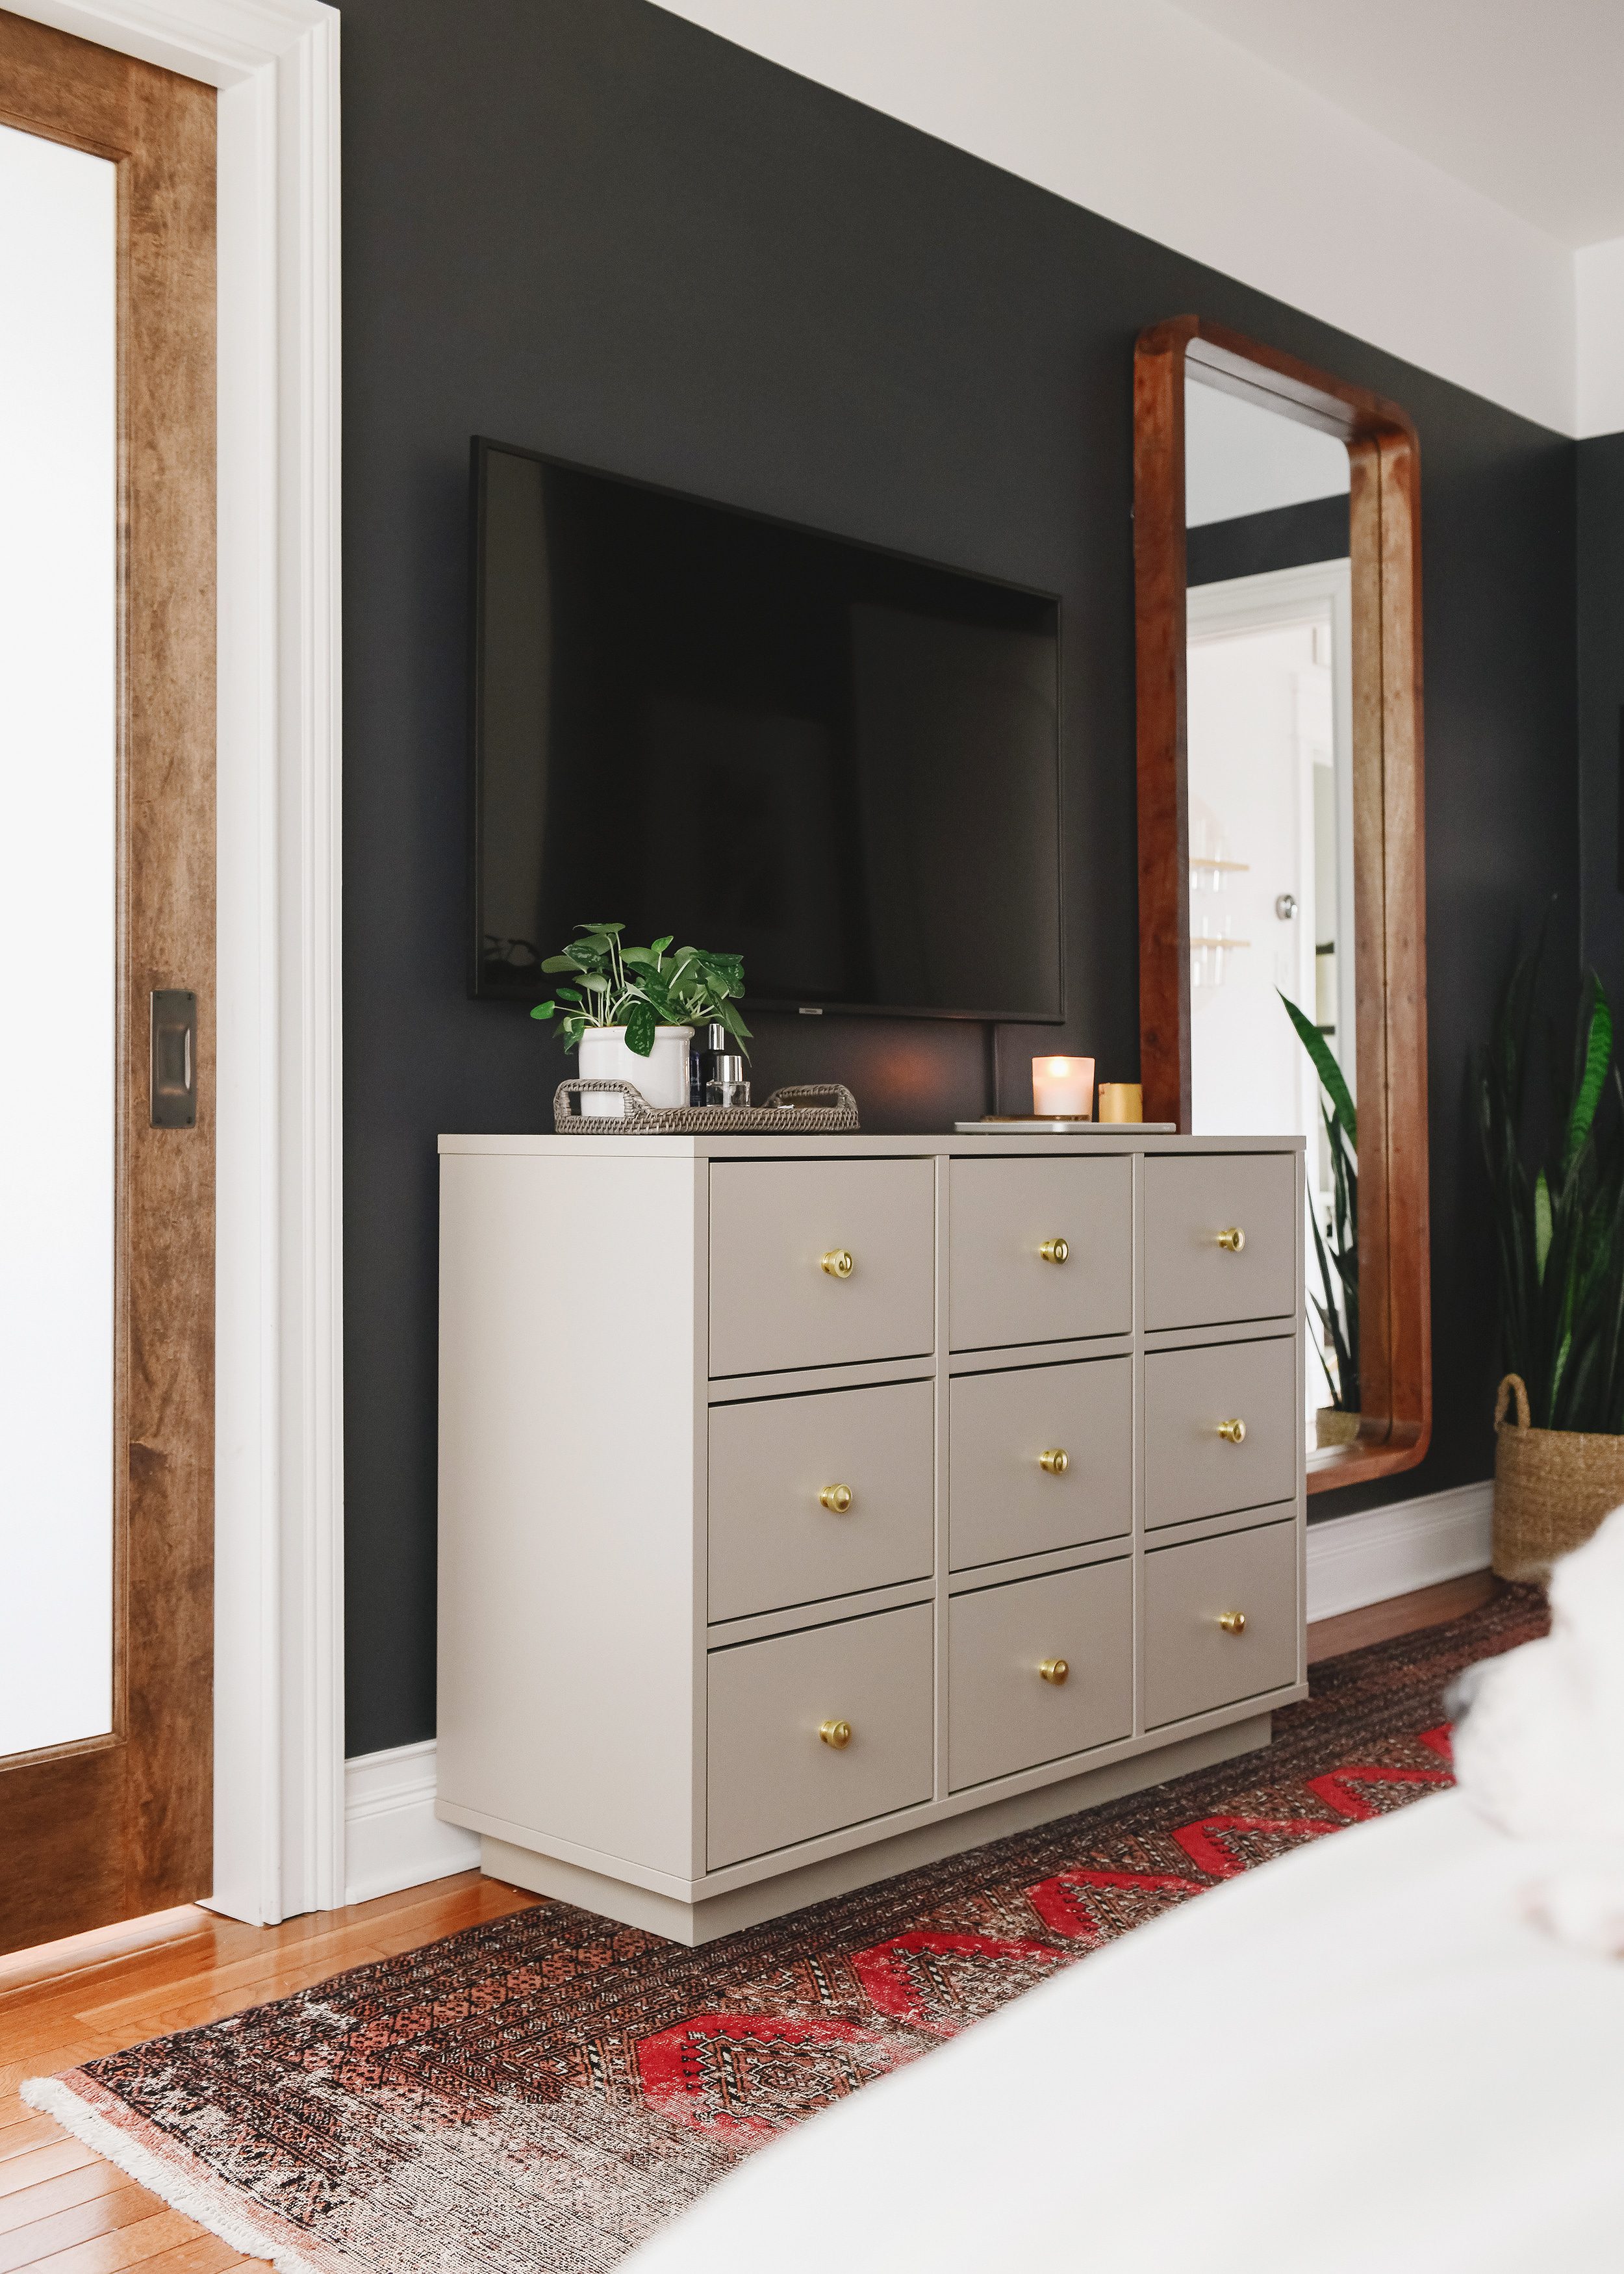 The completed dresser in our moody Chicago bedroom // via yelllow brick home